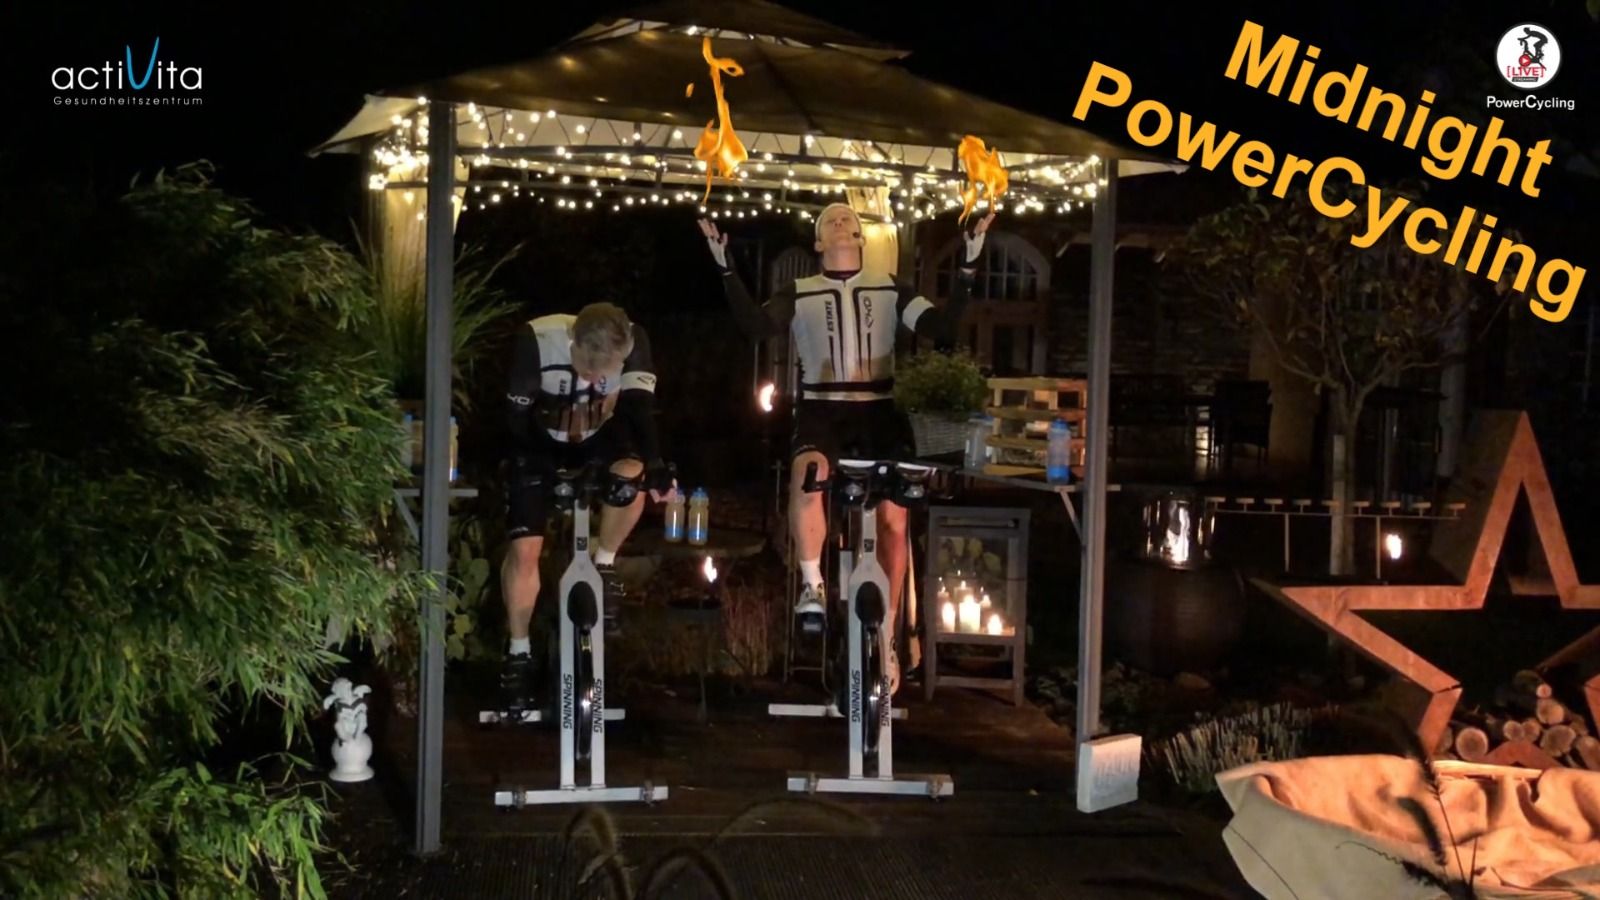 Midnight PowerCycling (onTour)